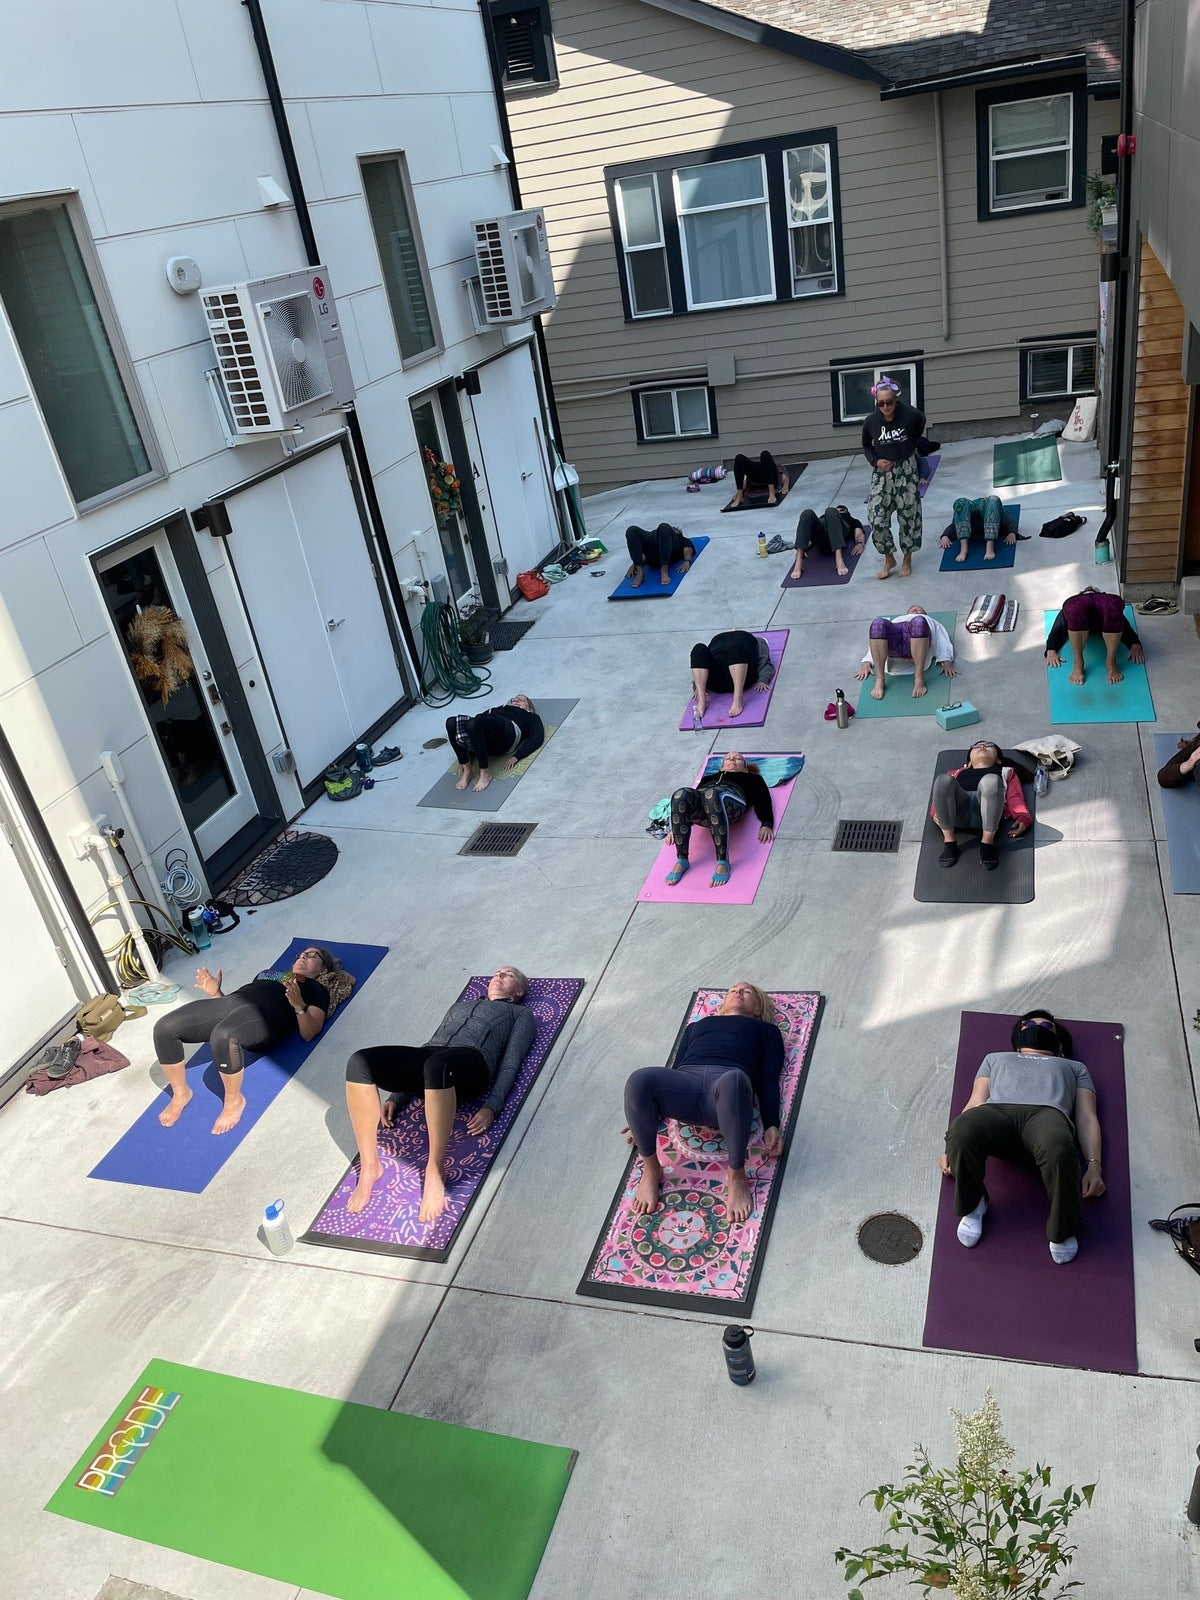 July 6 Saturday Yoga  with Tracy